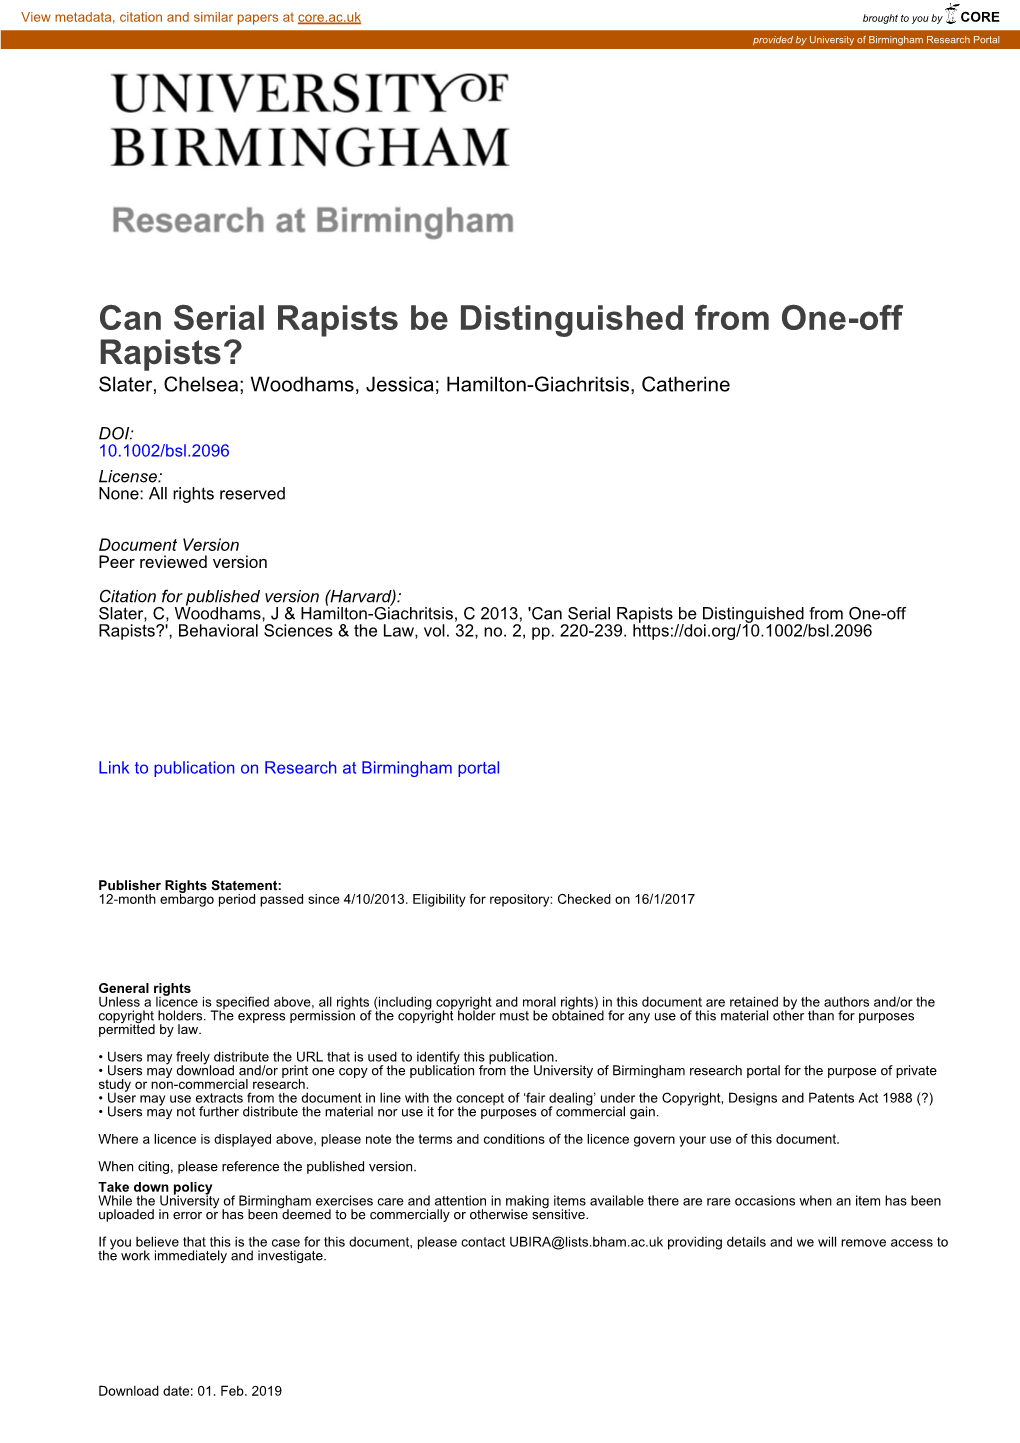 Can Serial Rapists Be Distinguished from One-Off Rapists? Slater, Chelsea; Woodhams, Jessica; Hamilton-Giachritsis, Catherine